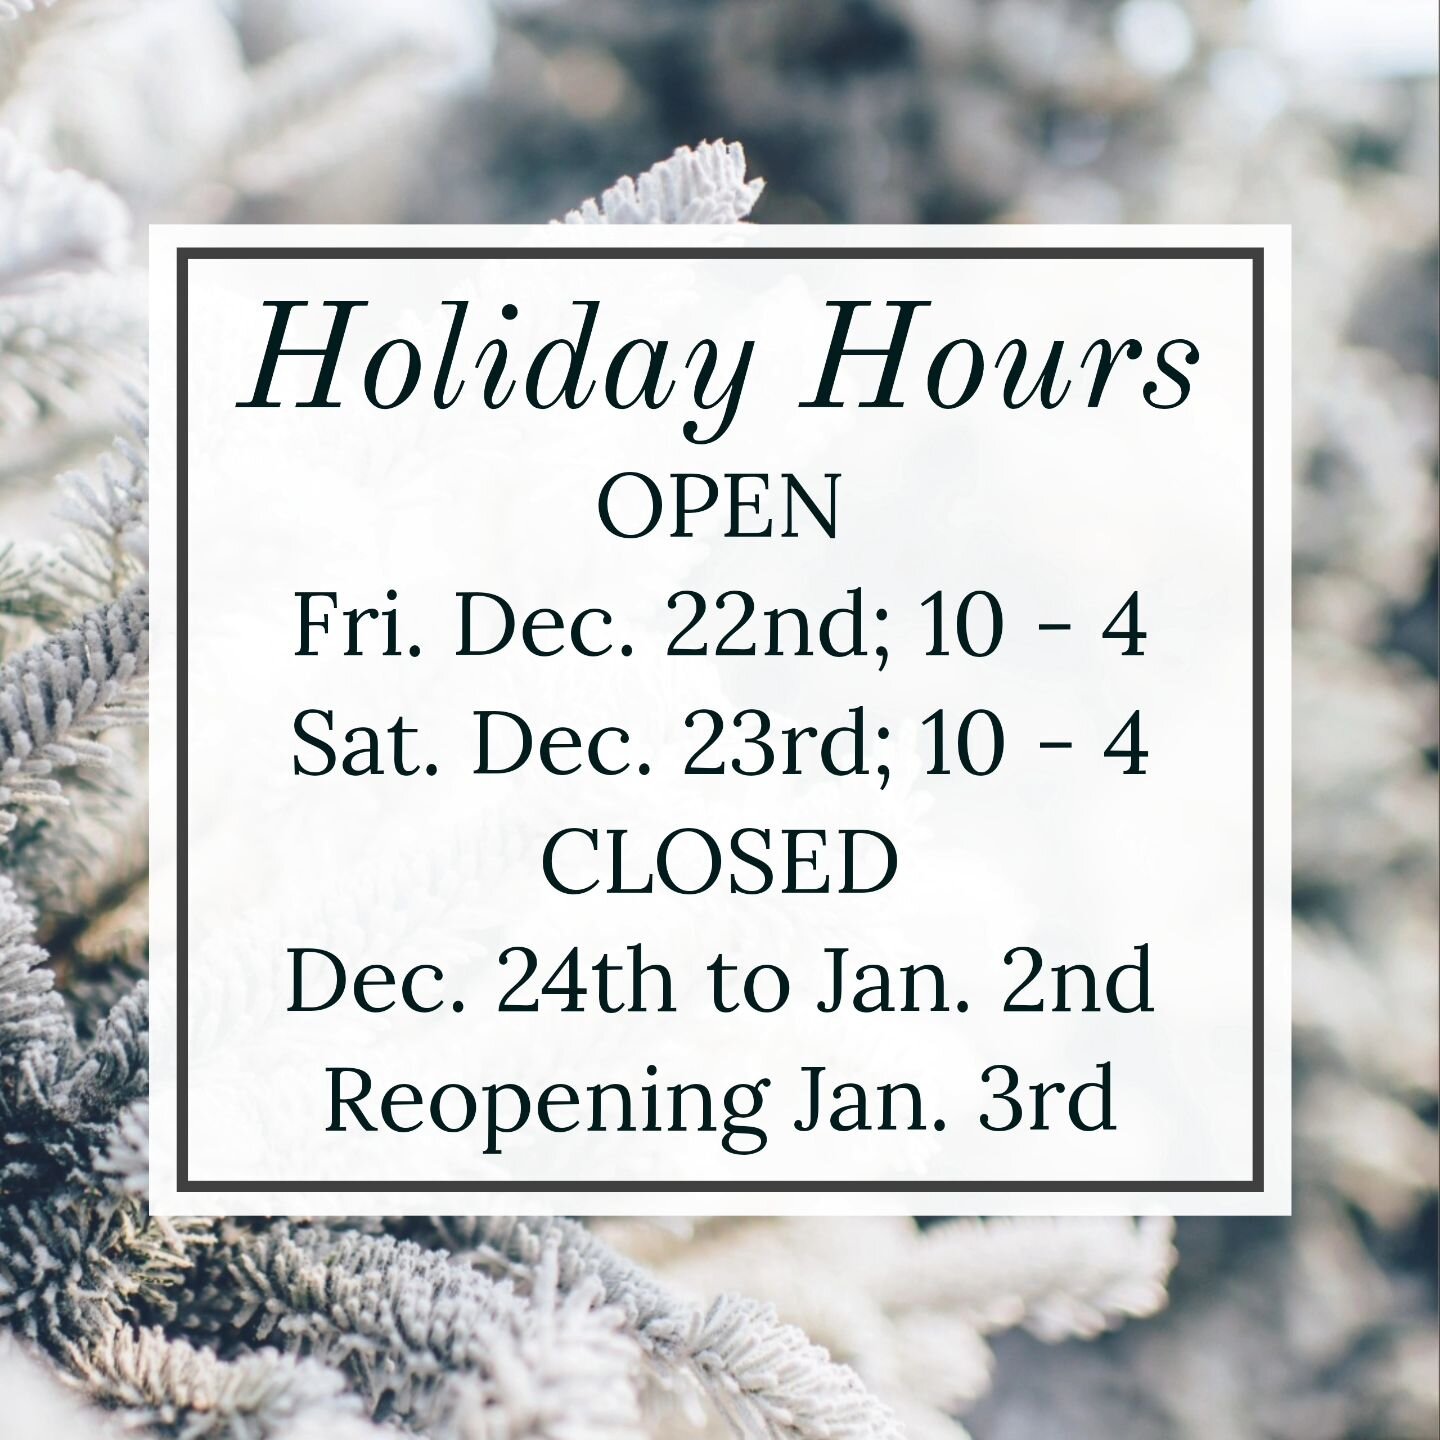 The countdown is on!!!
There's only a couple of in-store shopping days left before the start of our holiday break.

Please note that the Shoppe will be CLOSED from December 24th to January 2nd. We will reopen for our regular business hours on Wednesd